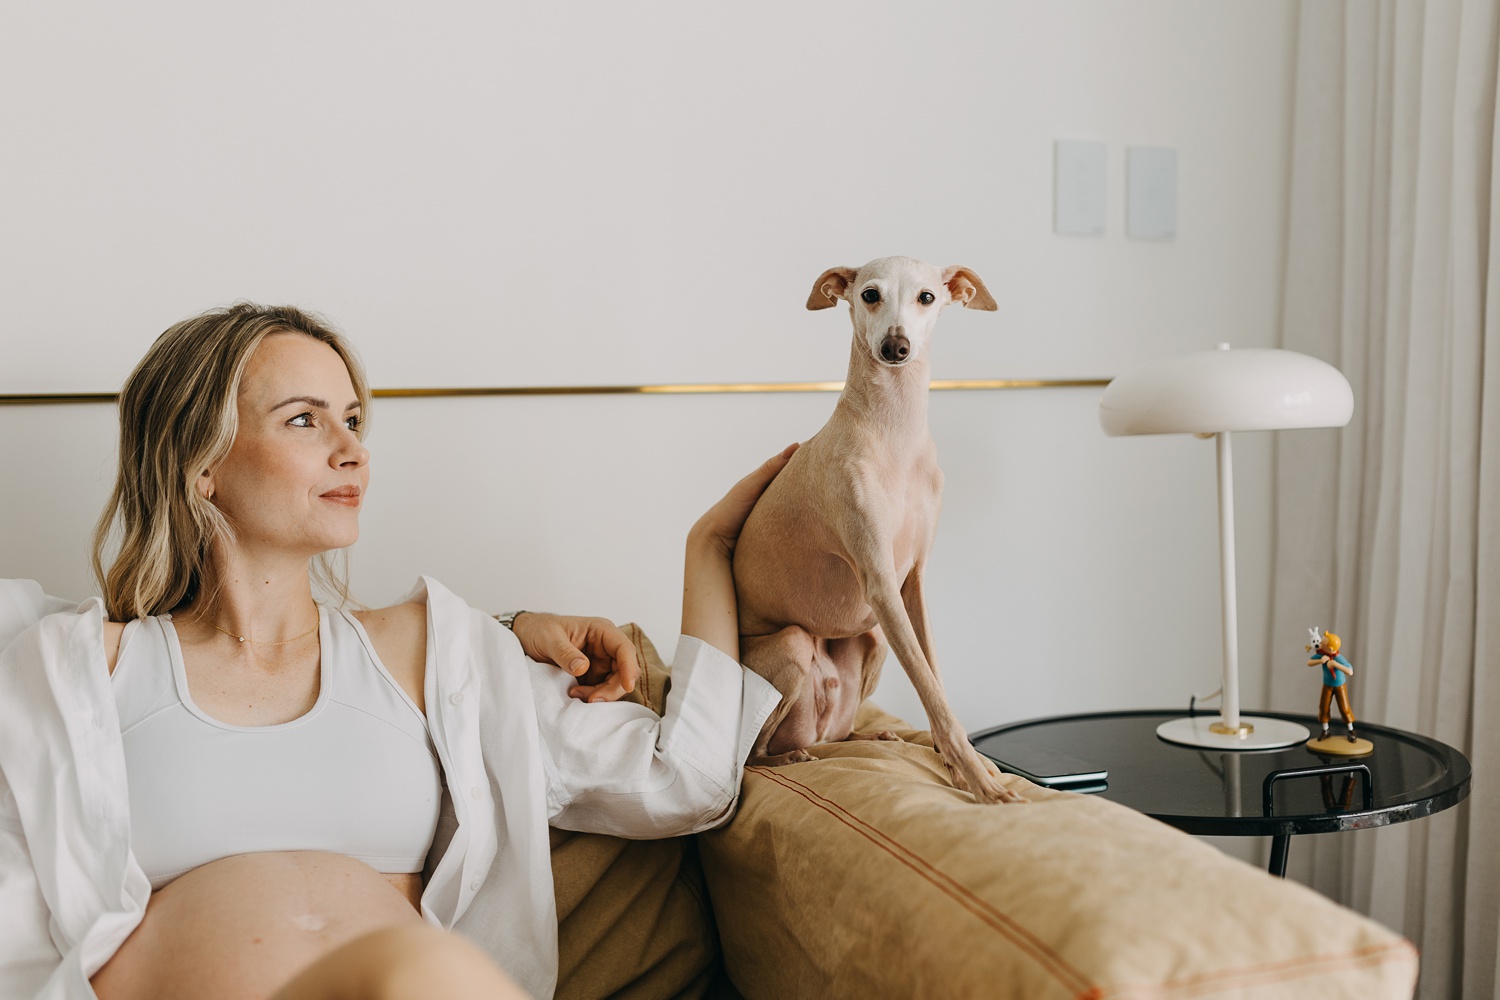 Capturing the love and anticipation of parenthood with two playful Italian Greyhounds.